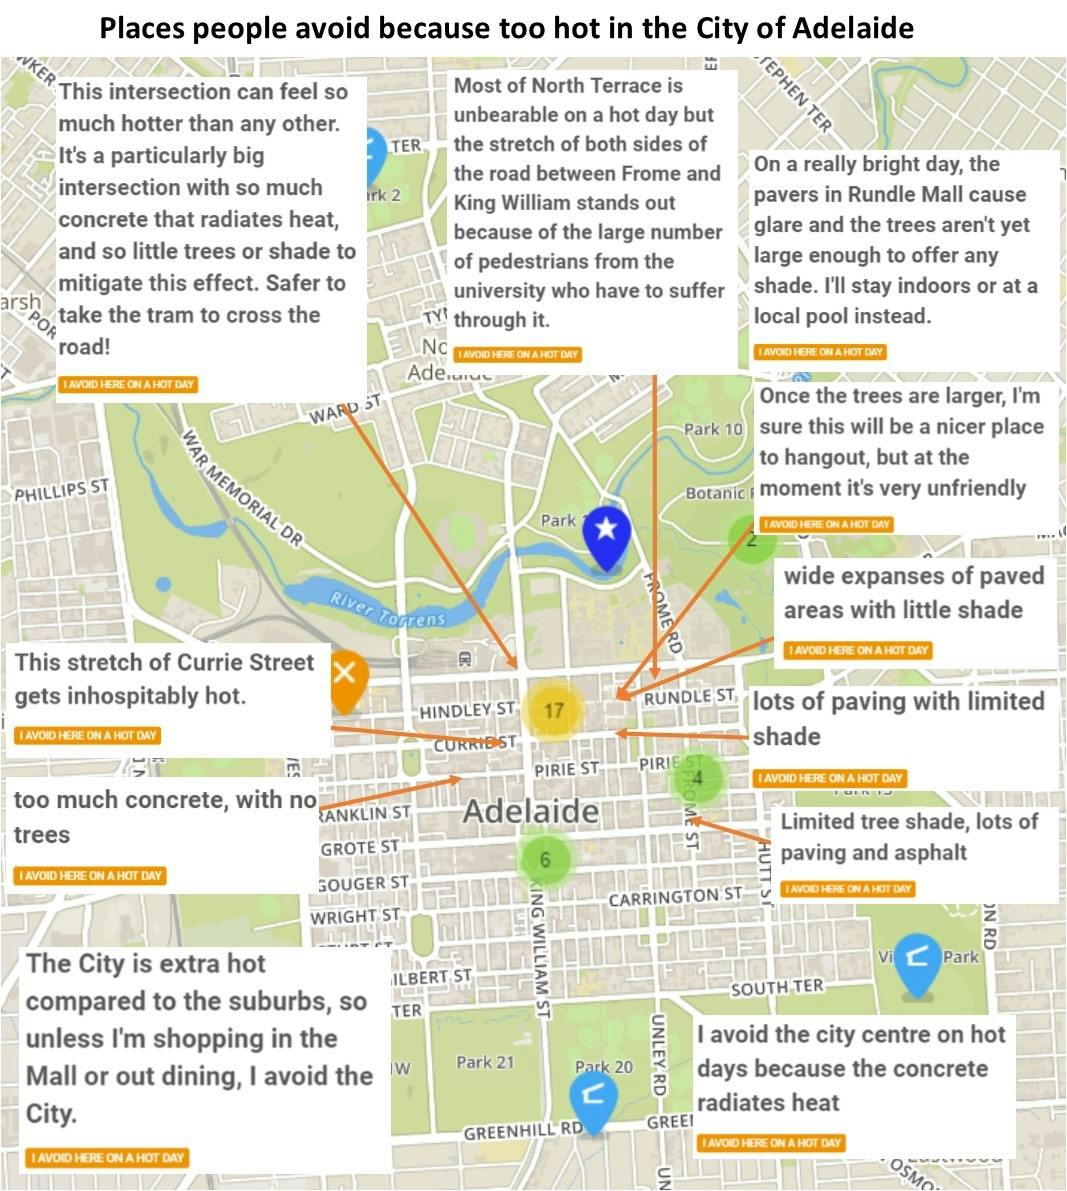 Places People Avoid In Extreme Heat In The City Of Adelaide